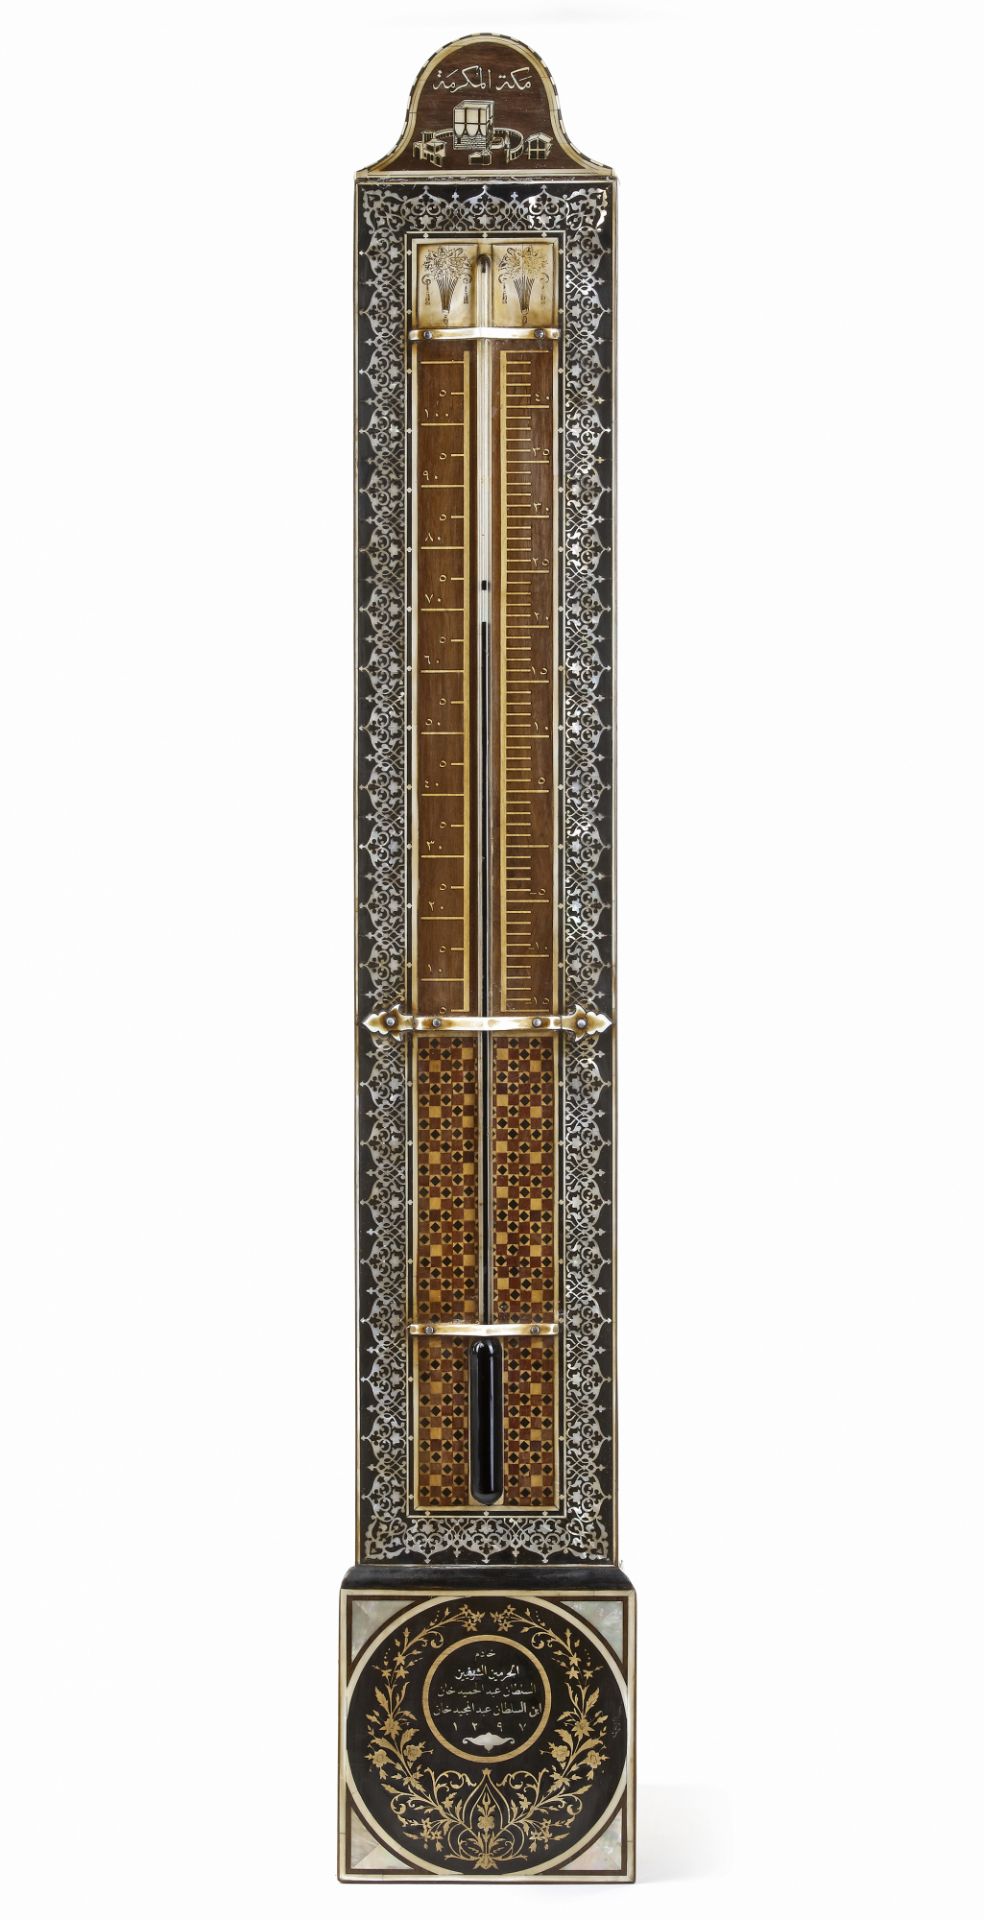 AN OTTOMAN WOODEN MOTHER-OF-PEARL AND IVORY INLAID BAROMETER,1297 AH/1879 - 1880 AD - Image 2 of 12